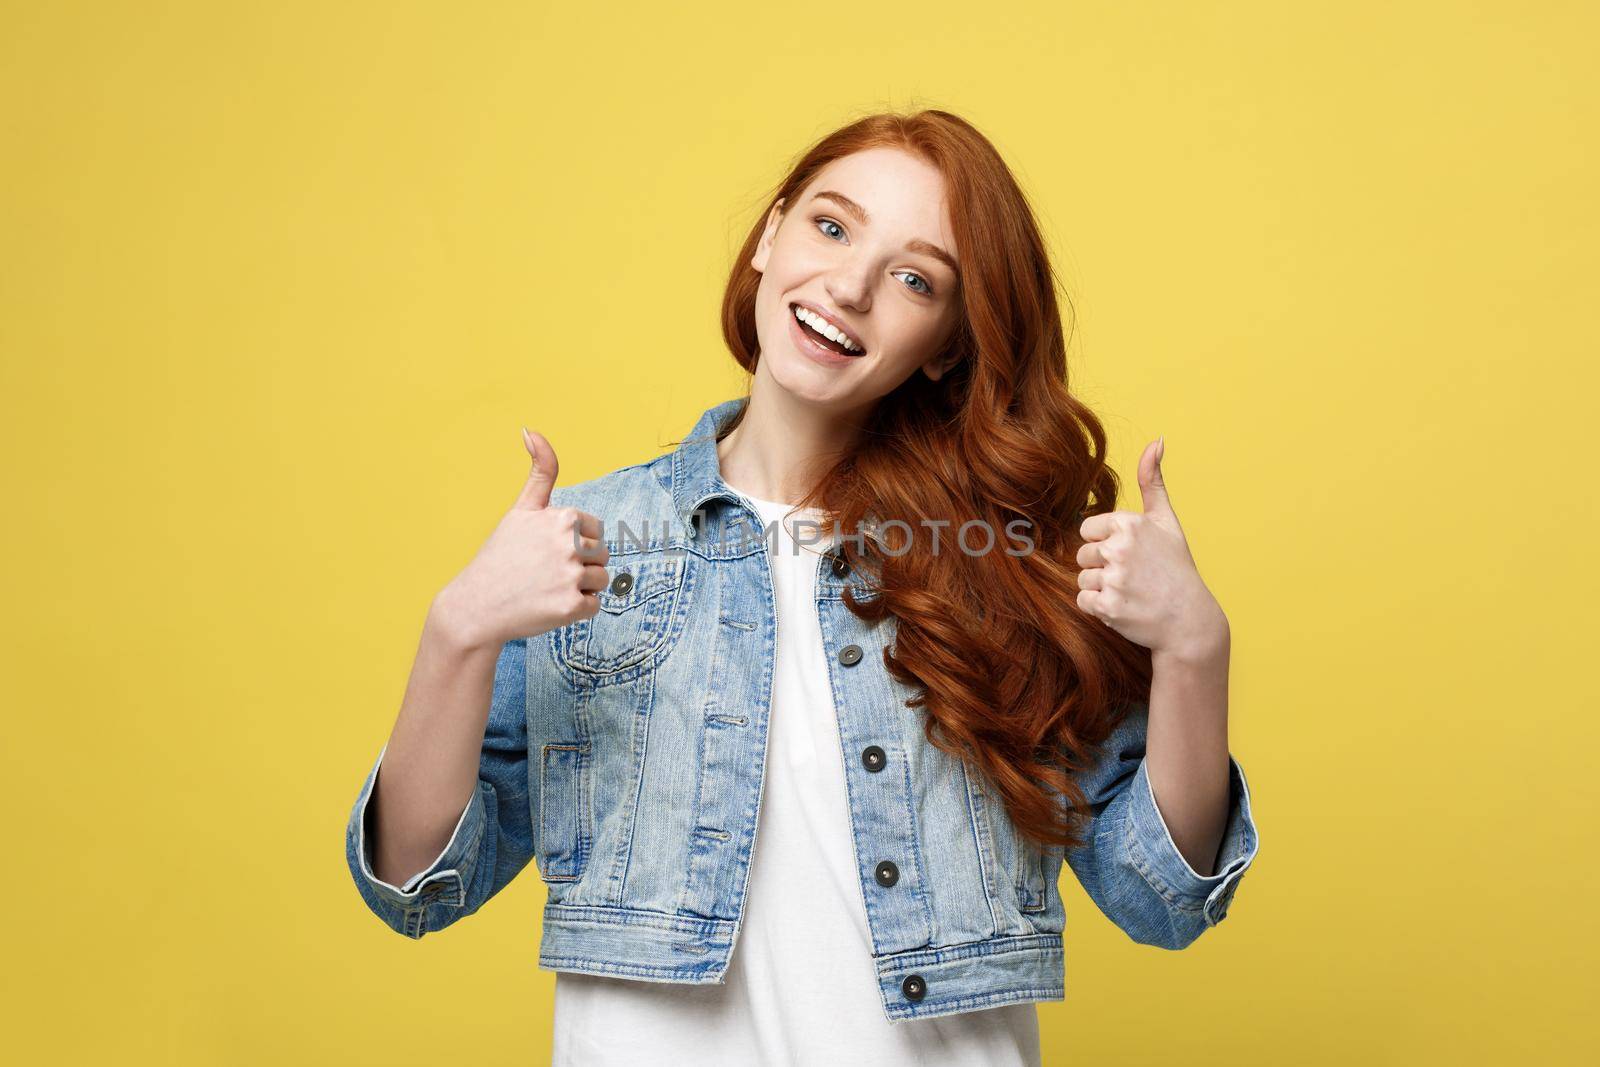 Lifestyle Concept: Satisfied successful girl with thumb up gesture on golden yellow background.